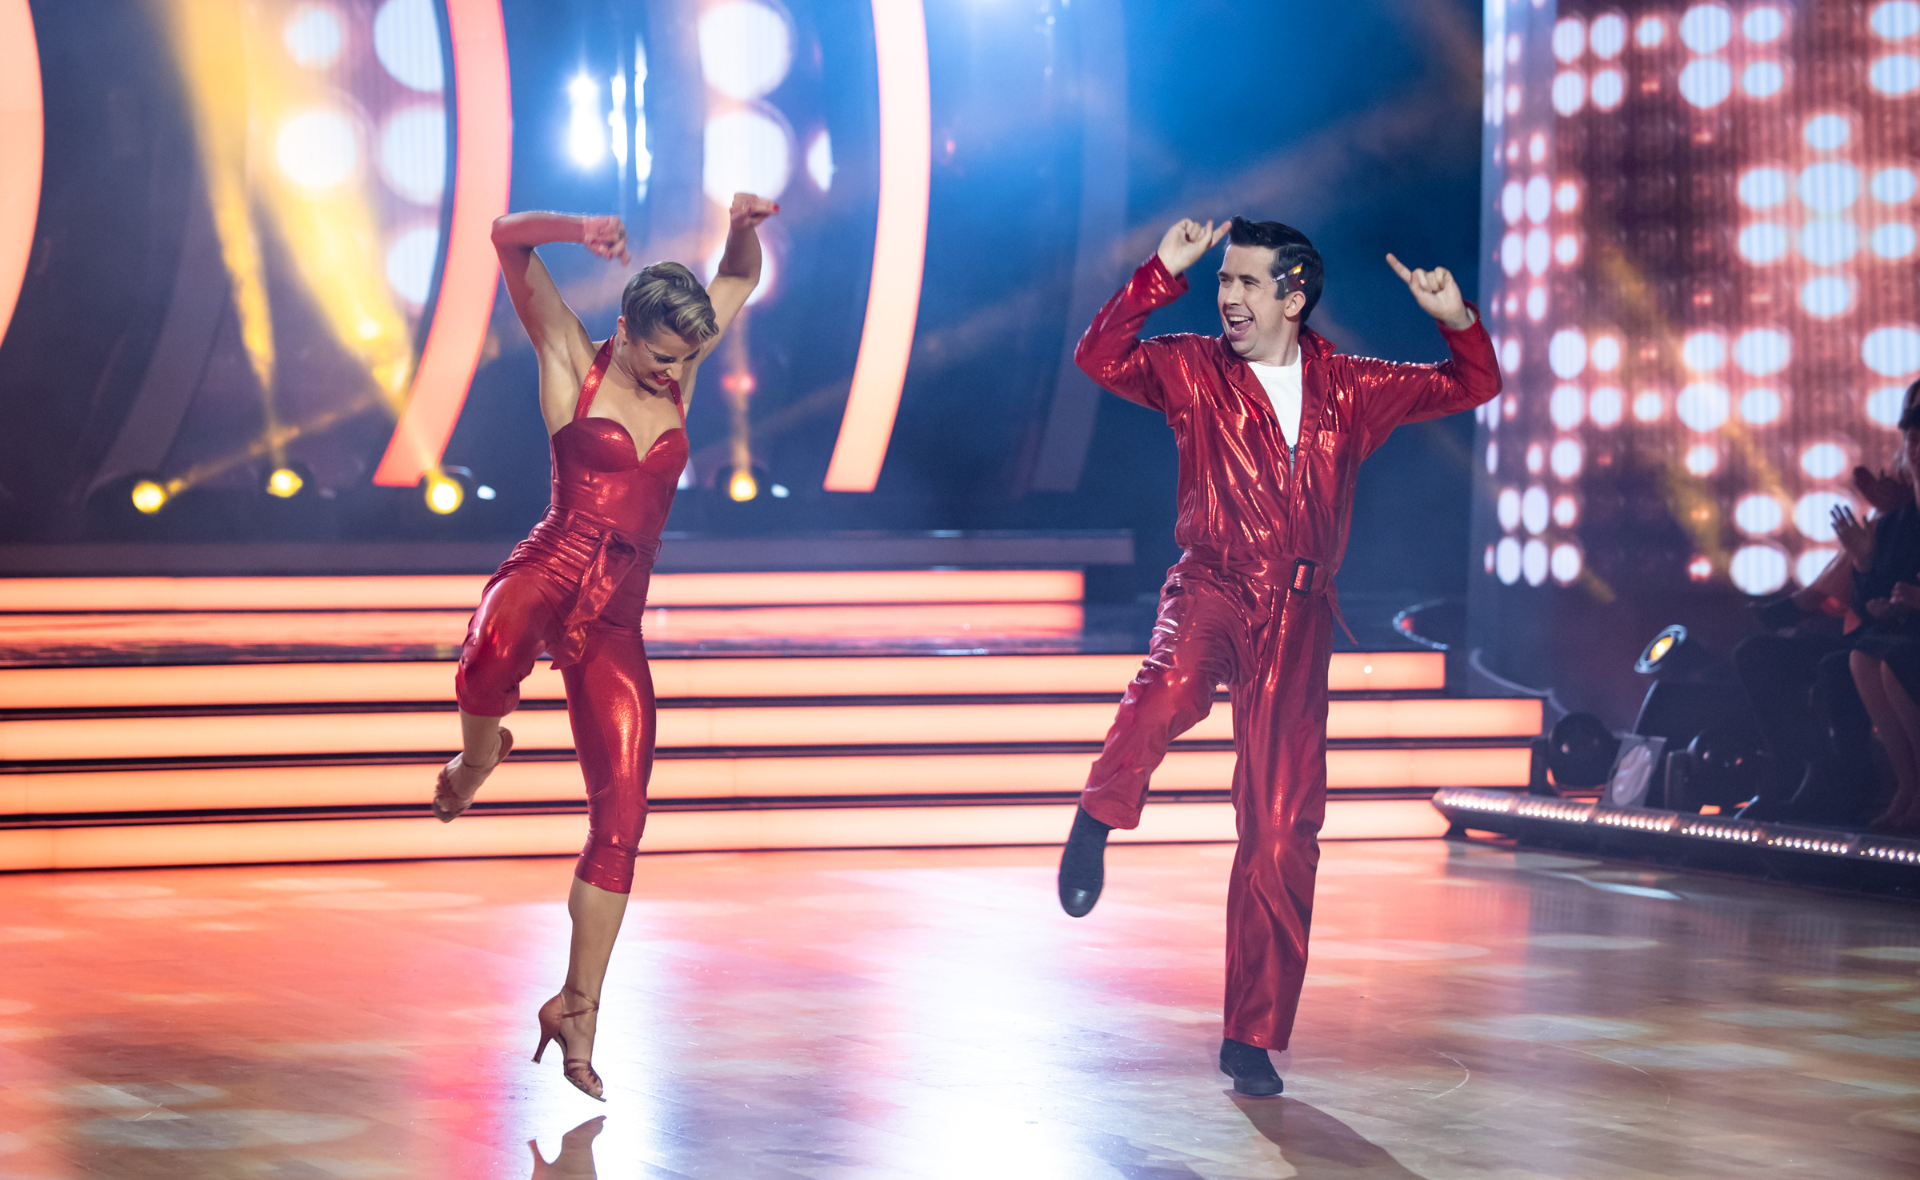 Supernerd turned Dancing With The Stars: Issa Schultz may have female fans, but he’s still single